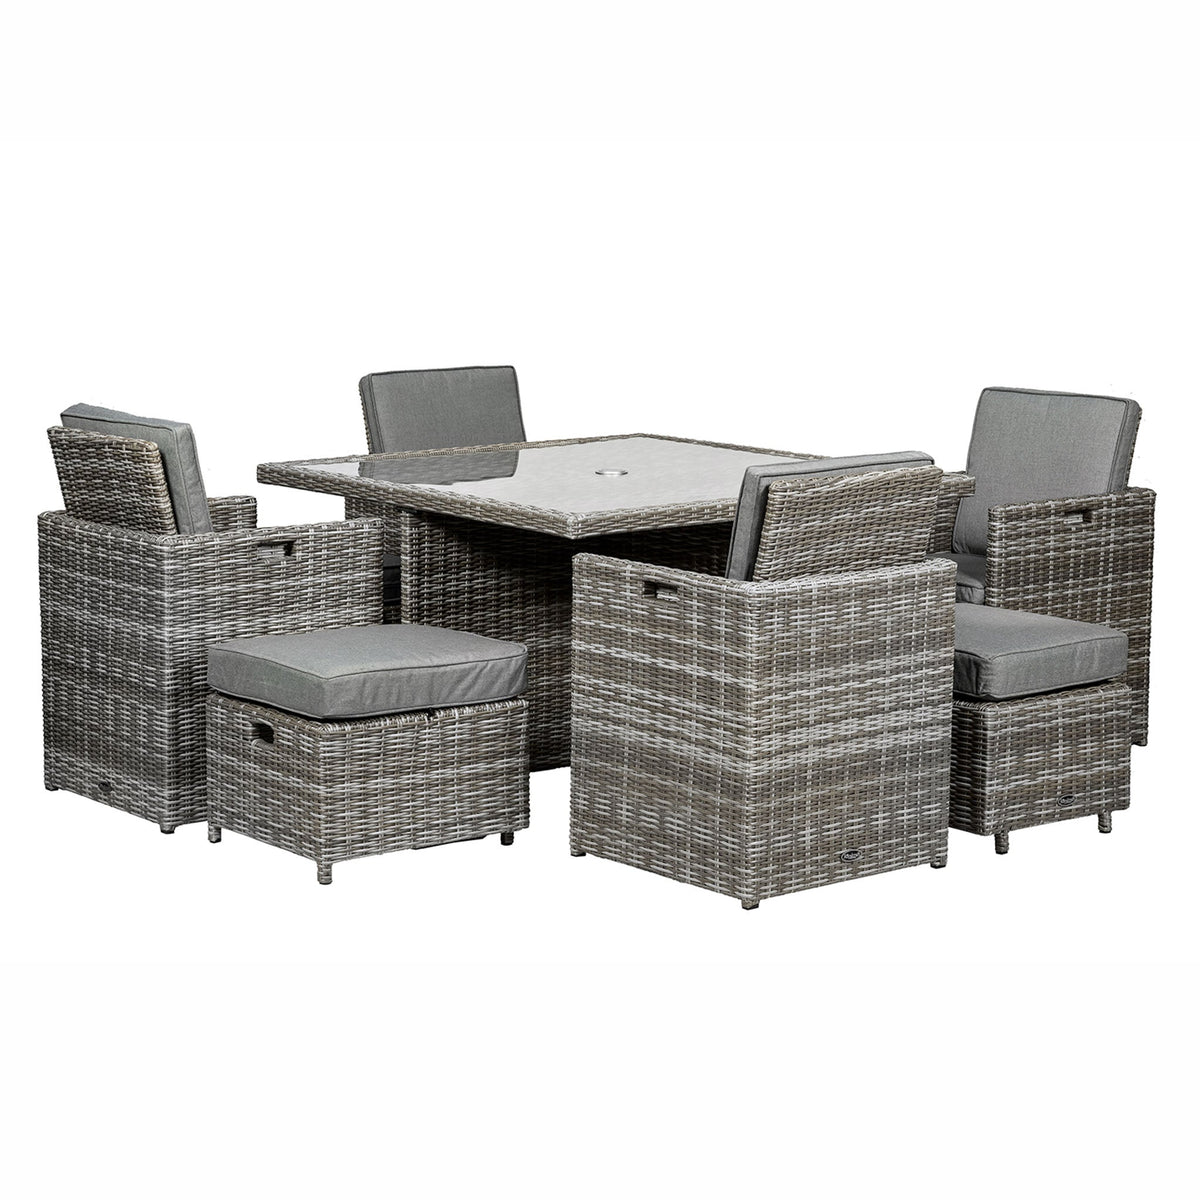 Paris 8 Seat Deluxe Rattan Cube Garden Dining Set from Roseland Home Furniture